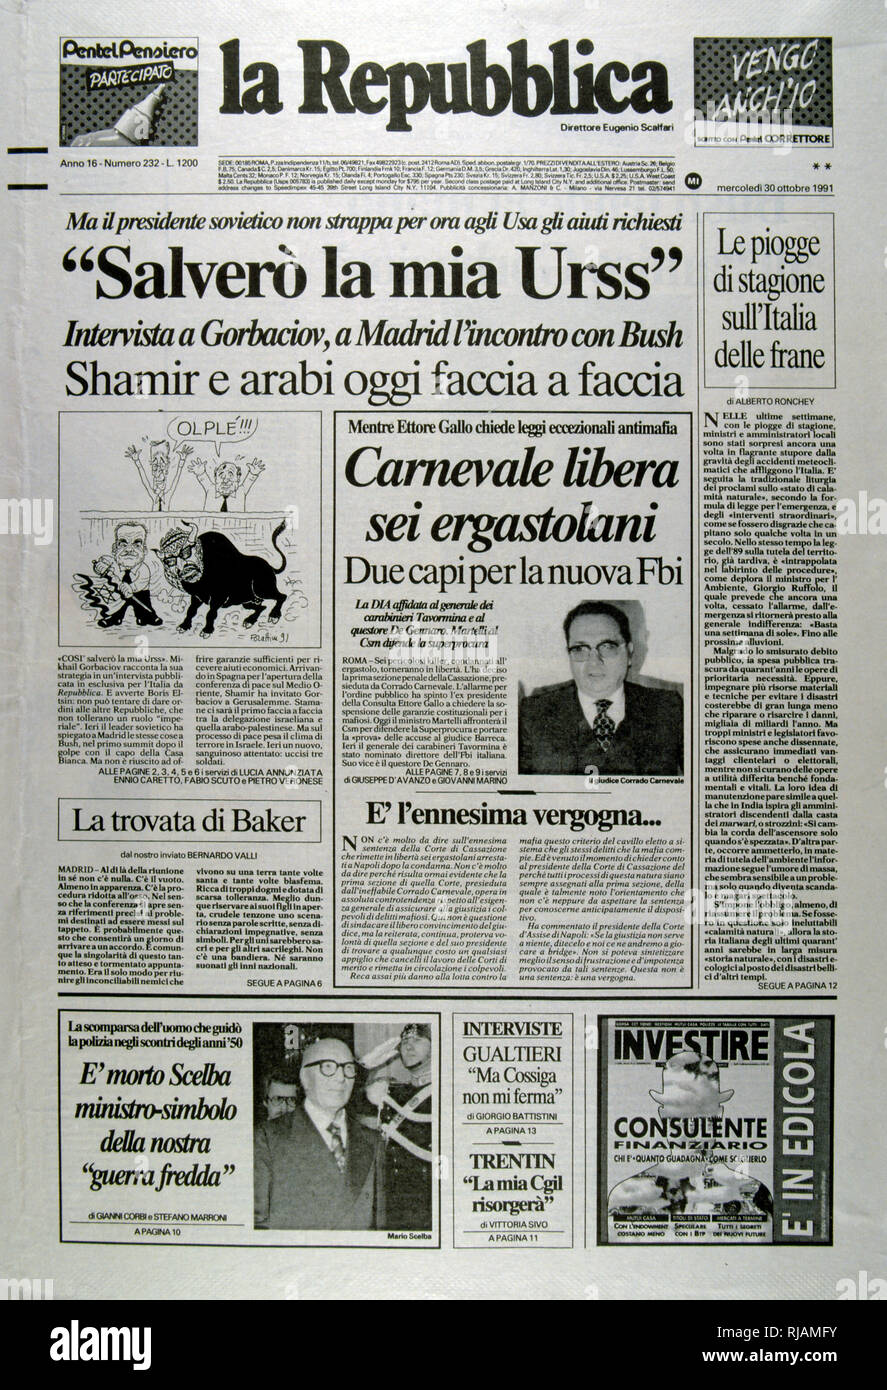 Front Page of the Italian publication 'La Republica' reporting on the Soviet position on the Madrid Conference of 1991;  a peace conference, held from 30 October to 1 November 1991 in Madrid, hosted by Spain and co-sponsored by the United States and the Soviet Union. It was an attempt by the international community to revive the Israeli-Palestinian peace process through negotiations, involving Israel and the Palestinians as well as Arab countries, including Jordan, Lebanon and Syria. Stock Photo